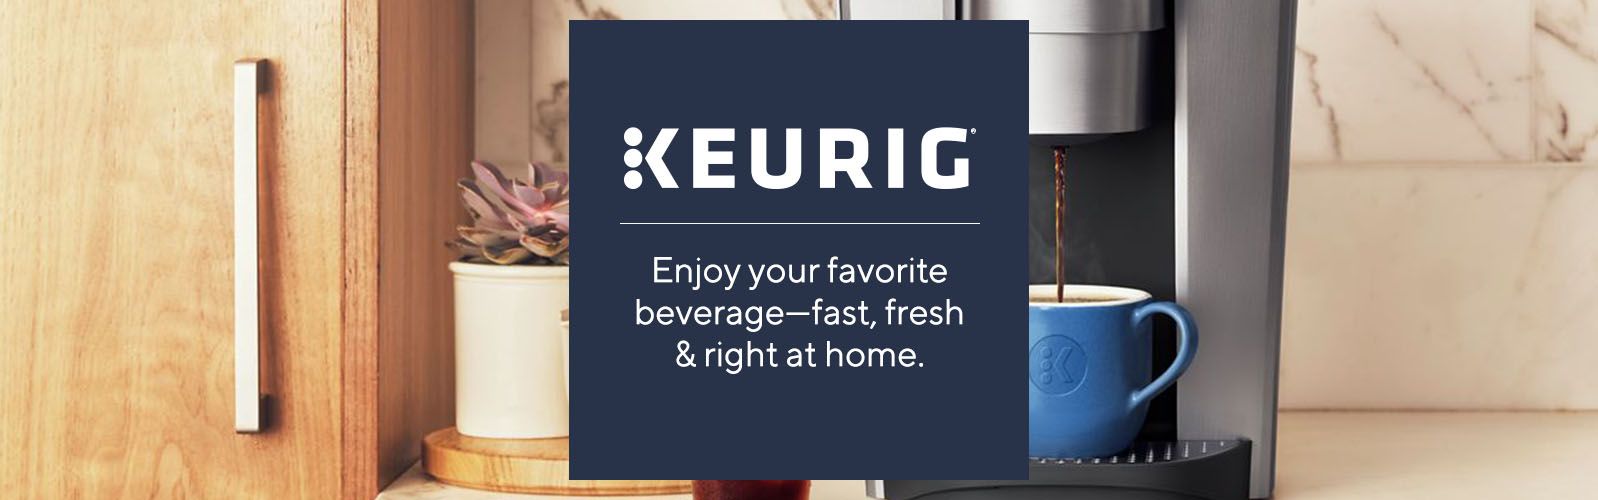 How the Keurig K-Iced Single Serve Coffee Maker Transforms Your Morning  Ritual